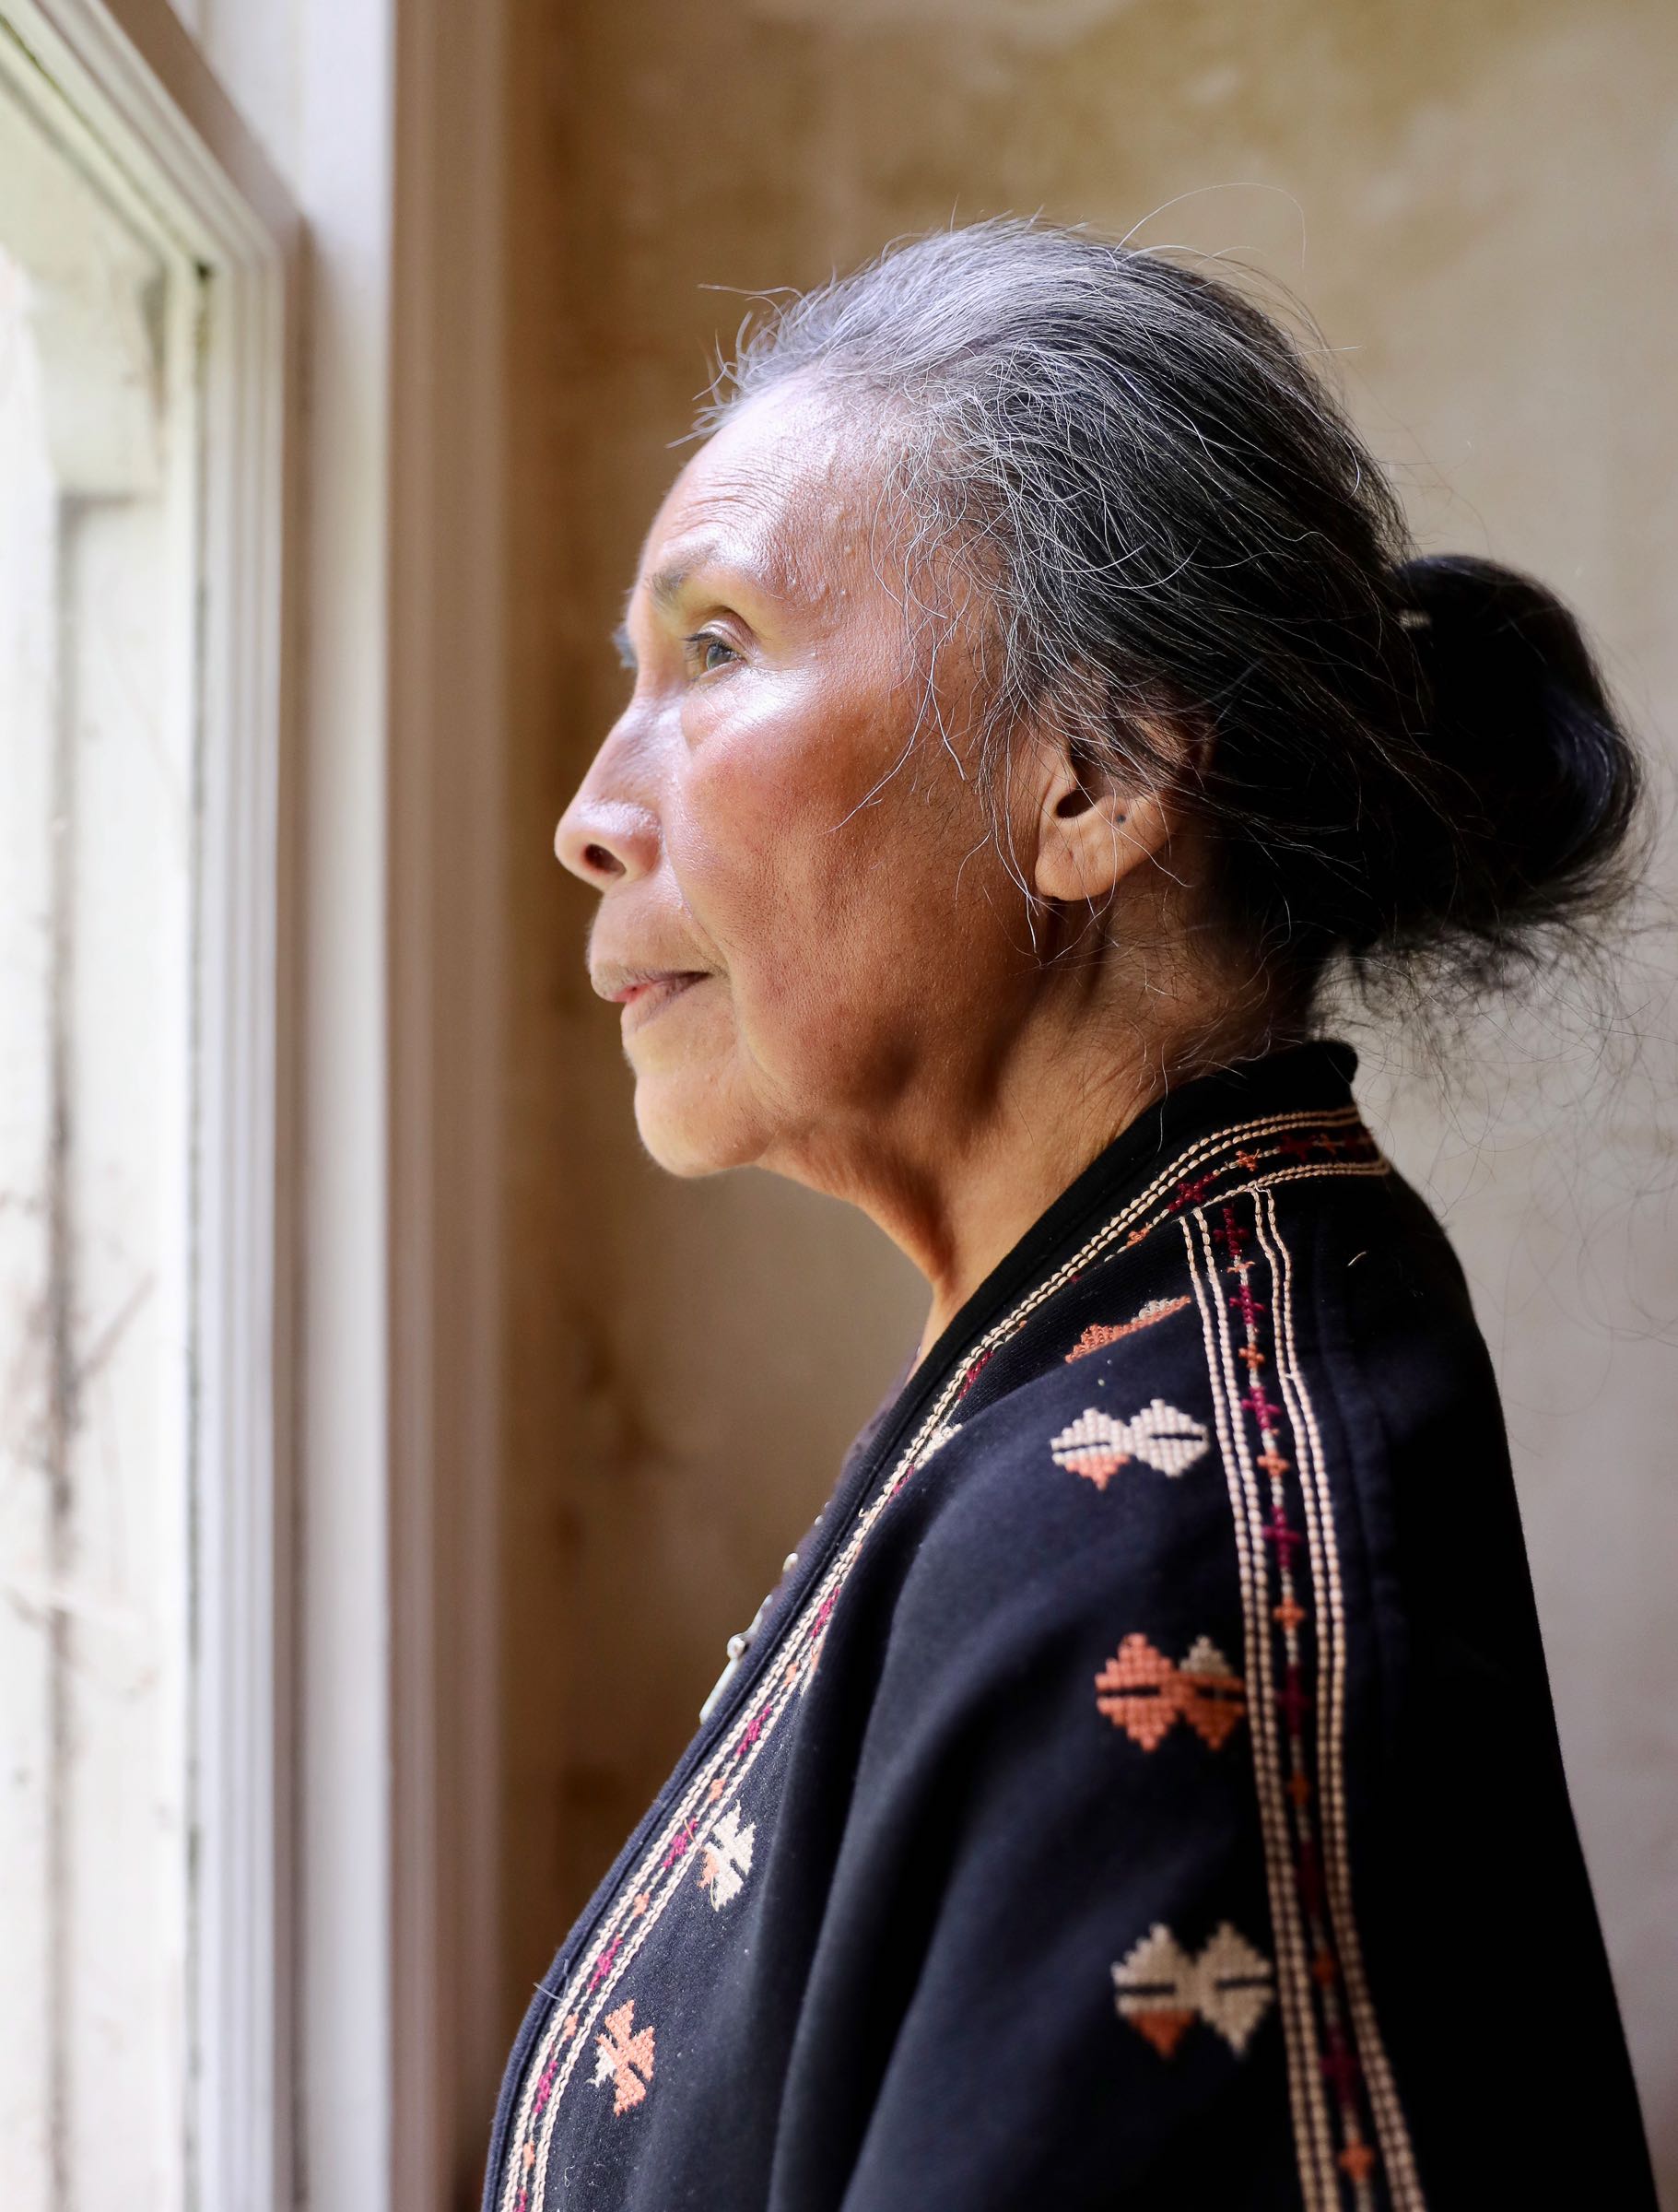 Panching, an elder Filipina, looks out a window of a historic house at Fort Barry with a contemplative look.